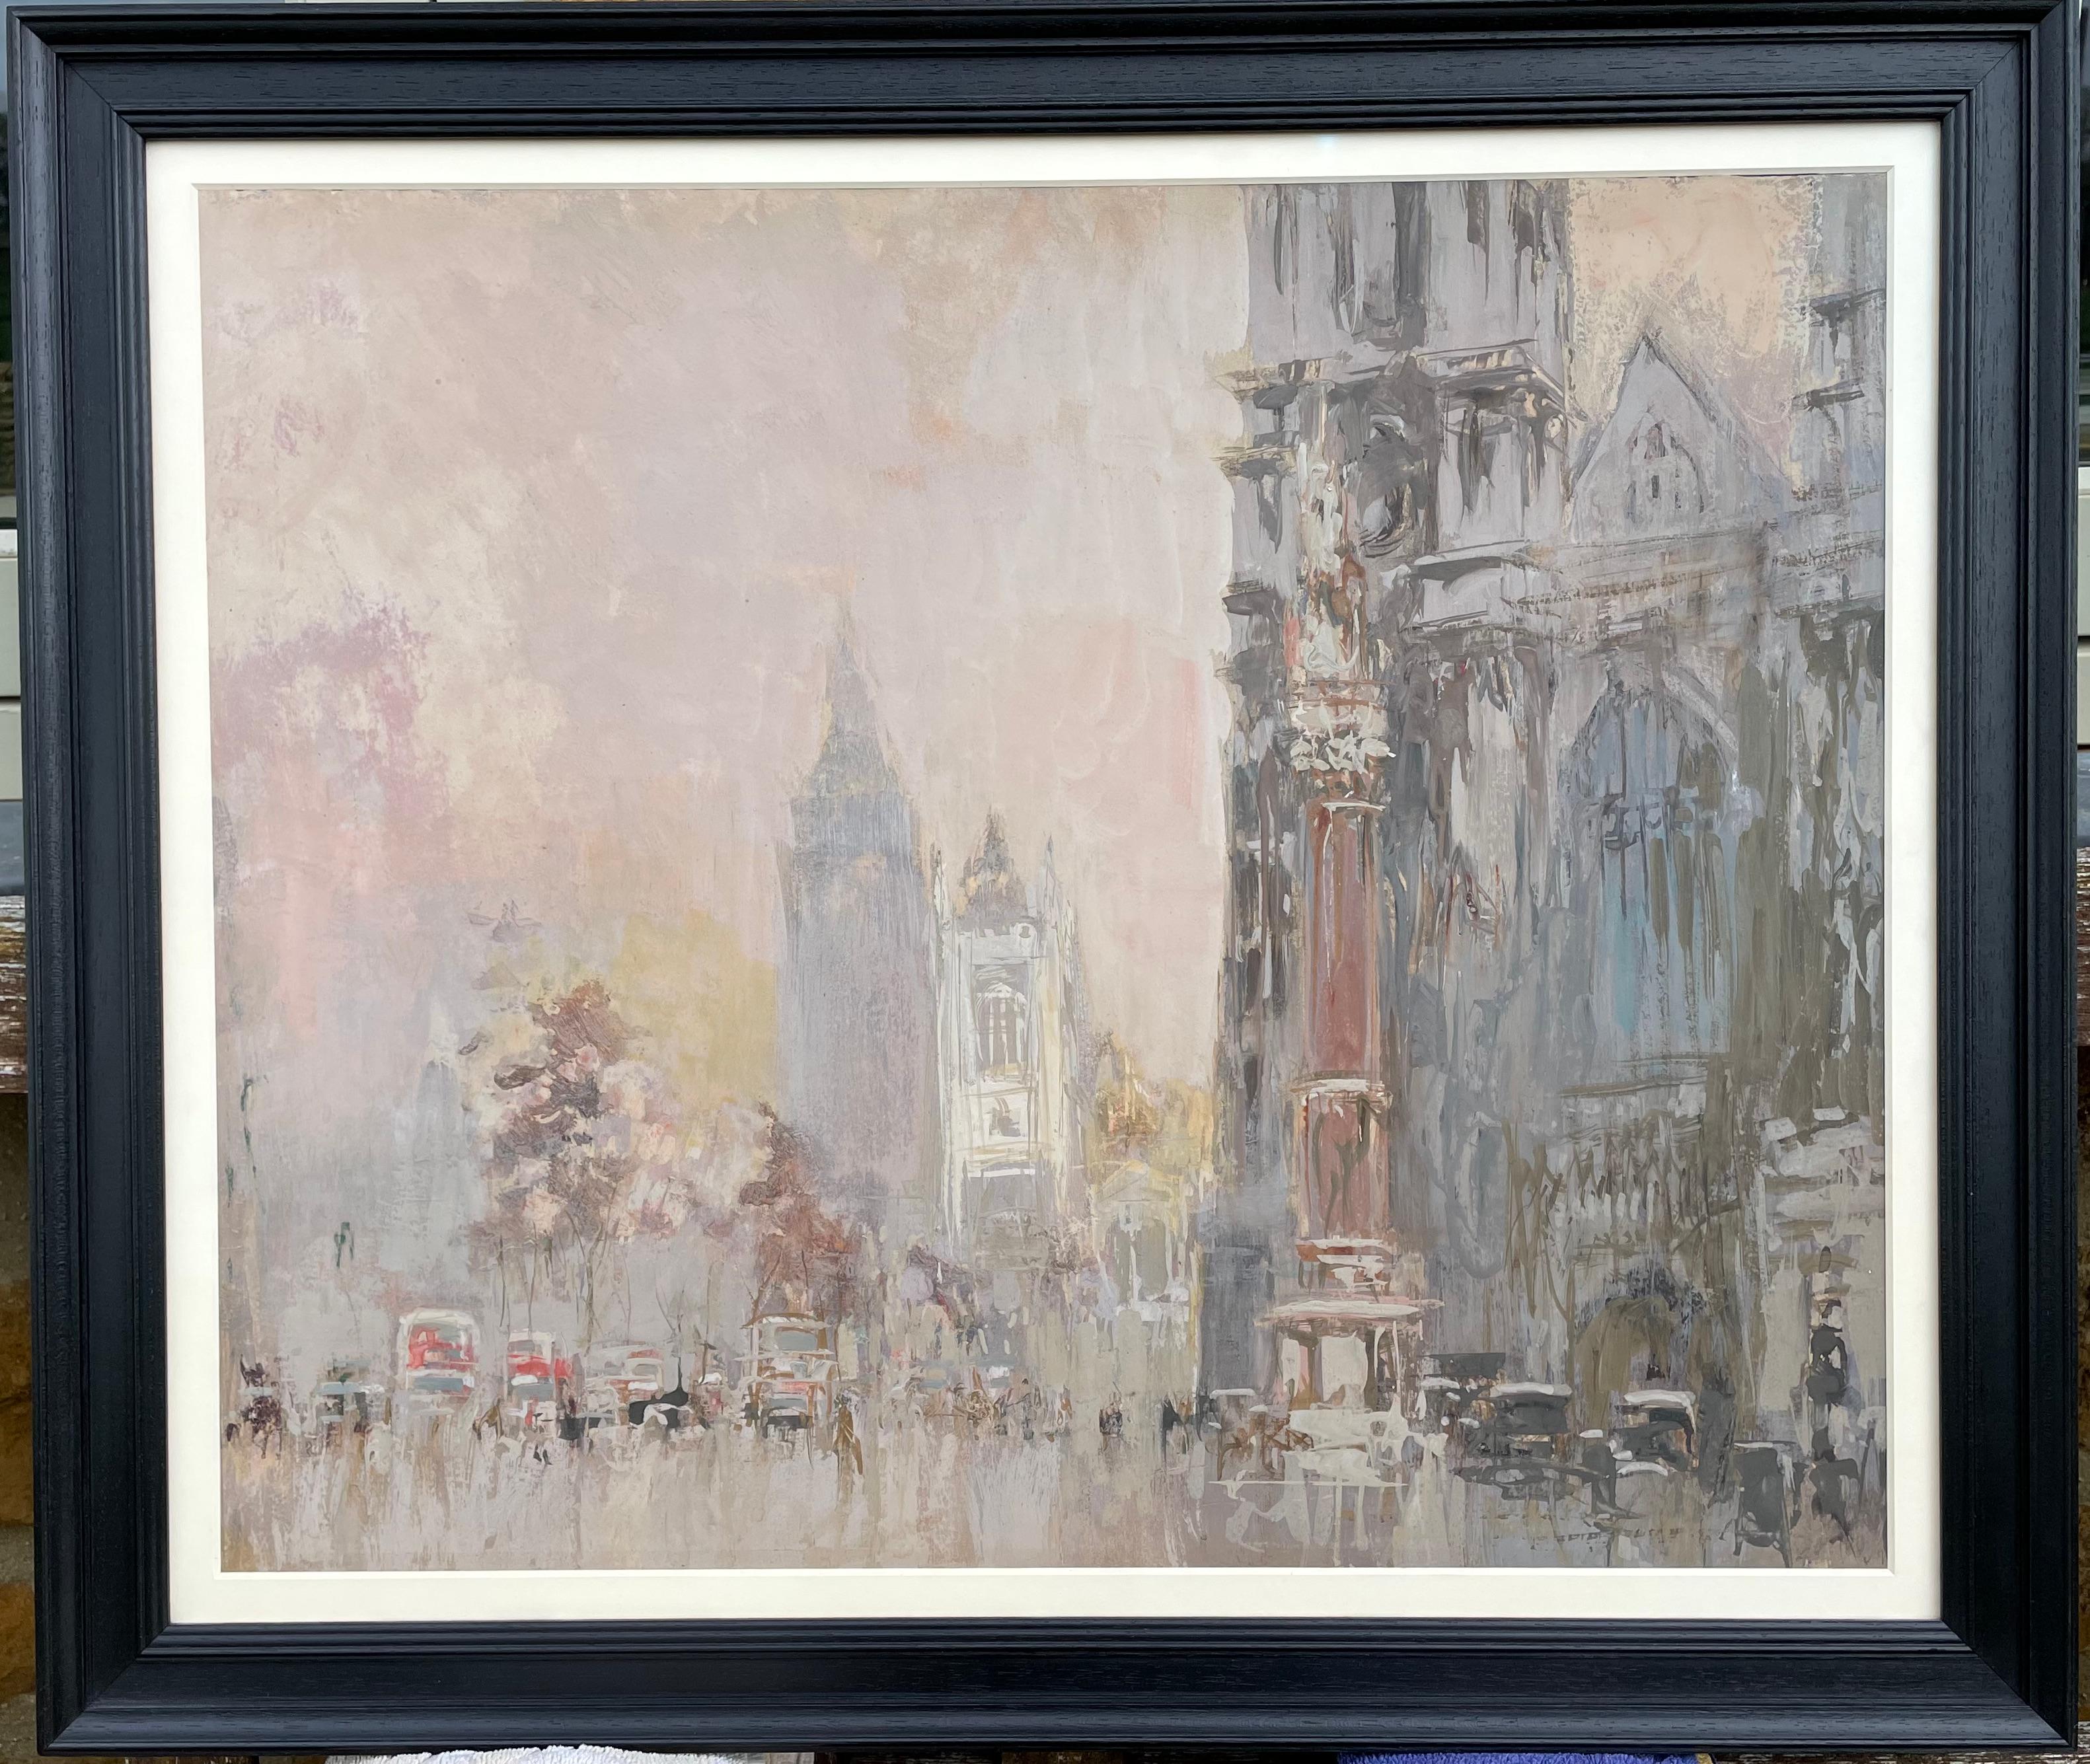 Westminster - 20th Century British Watercolour of London by William Walcot - Art by William Walcot, R.E., Hon.R.I.B.A.